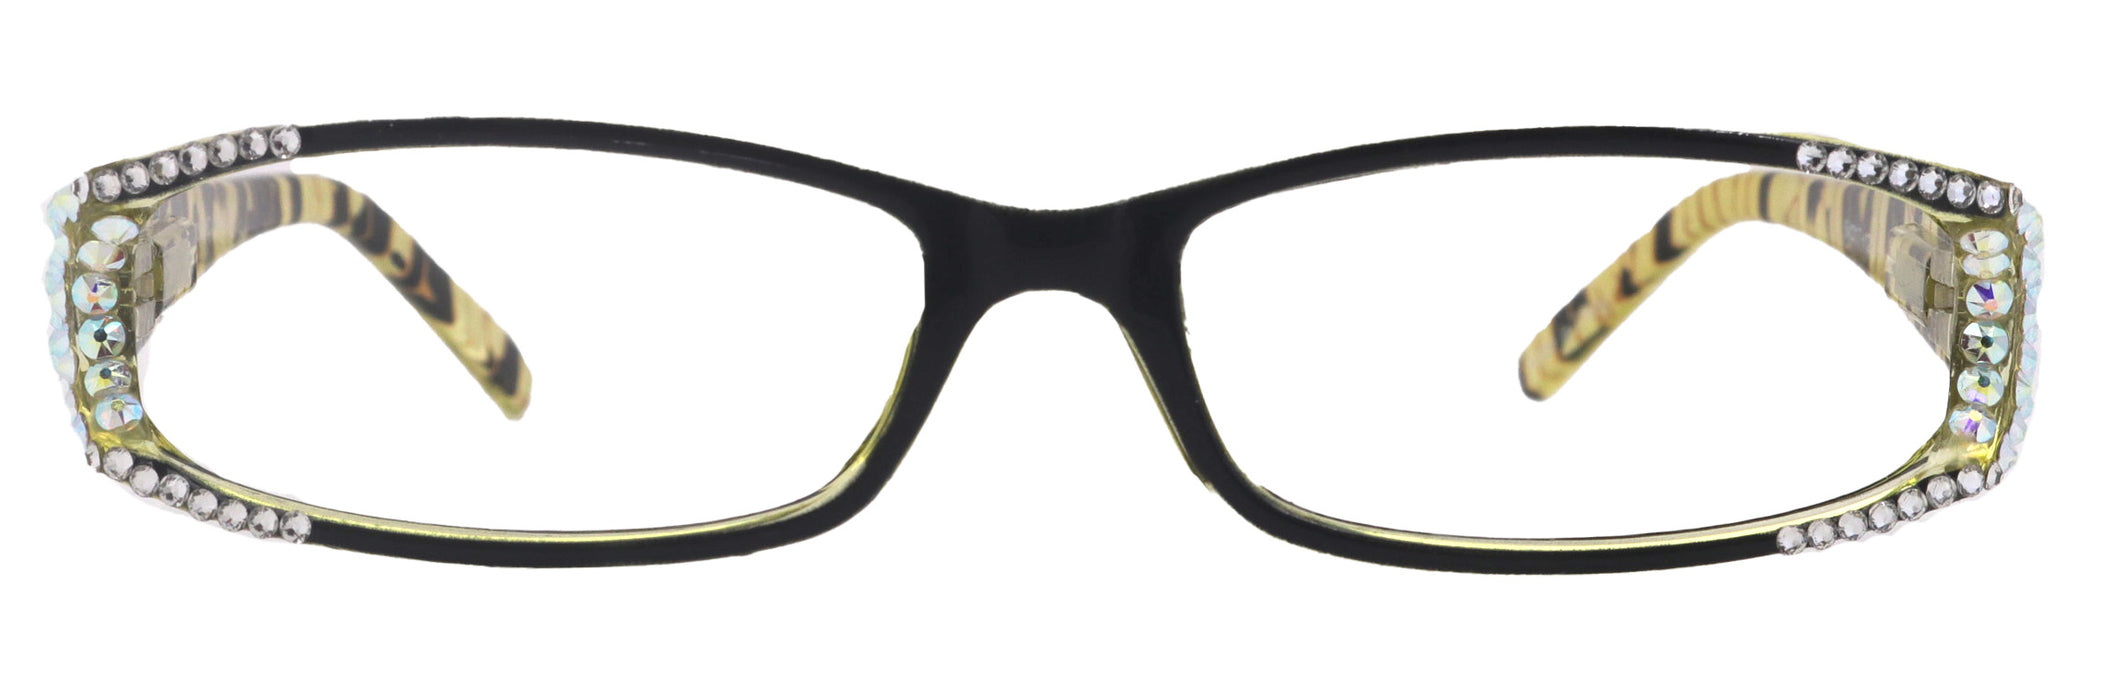 Tuscany, (Bling) Reading Glasses For Women Adorned W (Clear)    (Black, Green) Marble Rectangular, NY Fifth Avenue